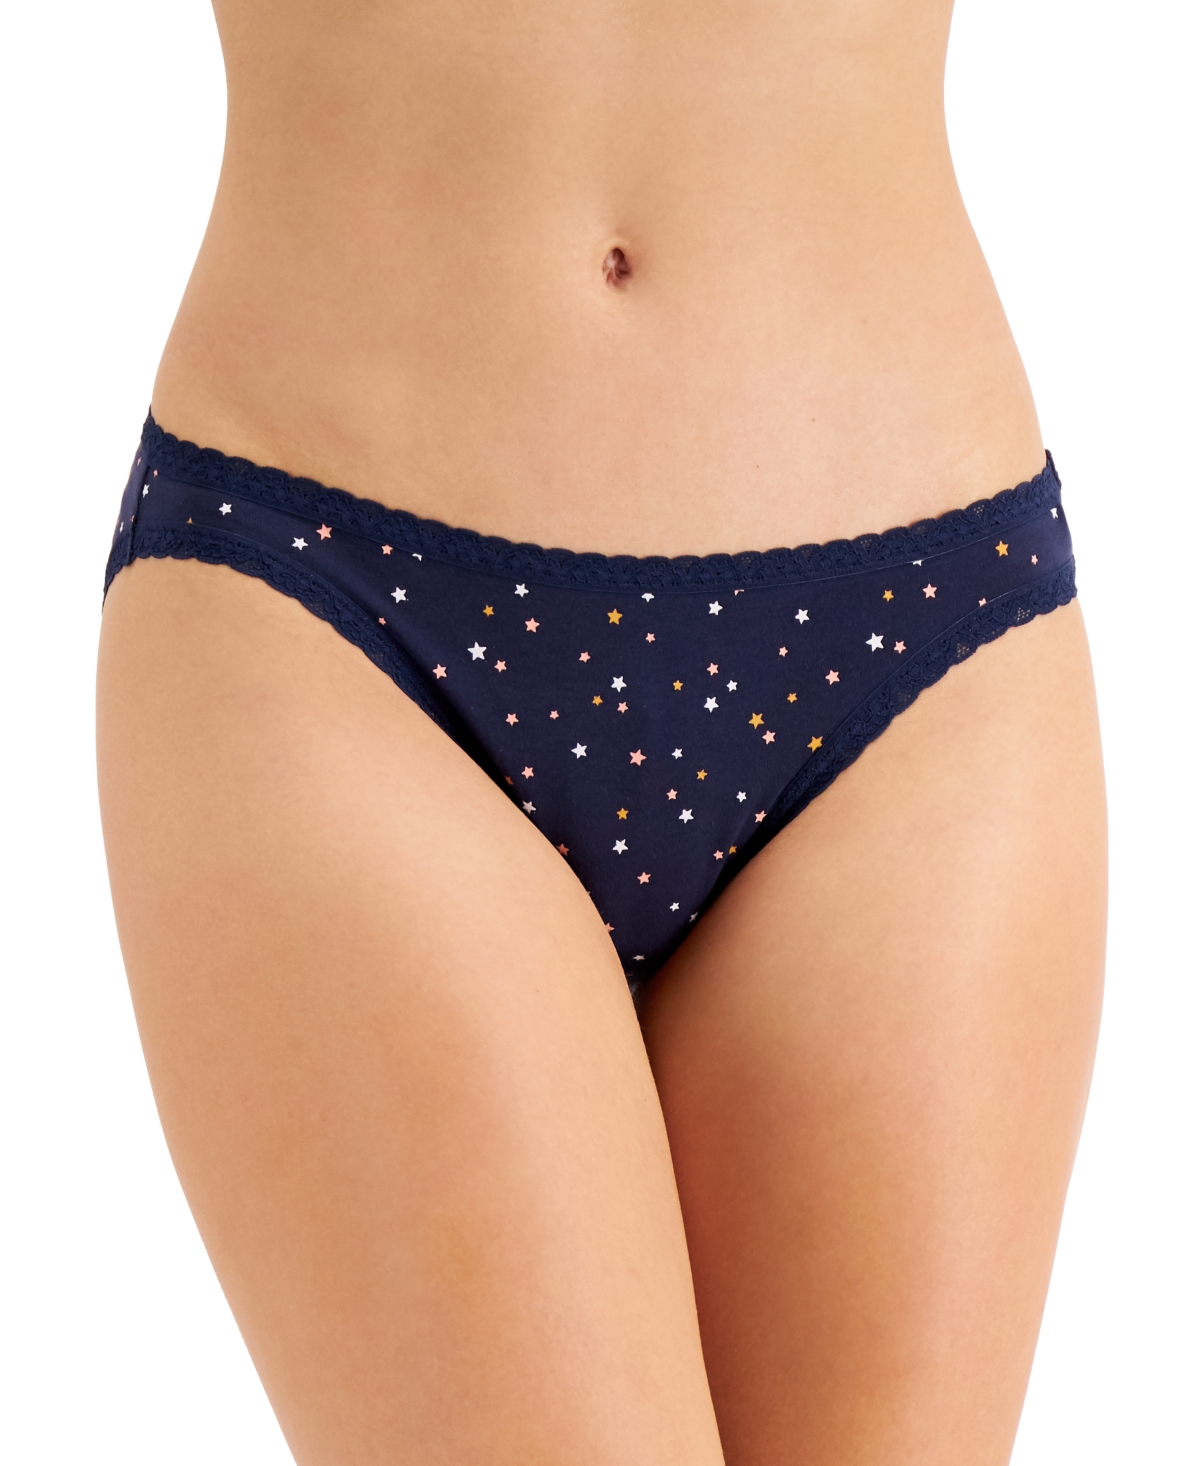 Set sail into comfort and style with the Jenni Women's Lace-Trim Thong in Navy Sail. This thong-style underwear combines a classic navy blue hue with delicate lace accents, offering a perfect blend of sophistication and allure for your lingerie collection. Features: Navy Sail Color: The deep navy blue hue evokes a sense of nautical charm and elegance, making it a versatile and timeless addition to your underwear drawer. Lace Trim: Delicate lace trim along the edges adds a feminine and romantic touch while ensuring a soft and gentle feel against the skin. Thong Cut: The thong design provides minimal coverage, perfect for wearing under fitted clothing to eliminate visible panty lines and achieve a seamless look. Soft Fabric: Crafted from a high-quality fabric blend, this thong offers a soft and comfortable feel against the skin, ensuring all-day comfort. Comfortable Waistband: The elastic waistband is designed for a secure and comfortable fit, allowing you to move freely throughout the day. Material: Body: 95% Cotton, 5% Spandex Lace: 88% Nylon, 12% Spandex Care Instructions: Machine wash cold with like colors Use only non-chlorine bleach when needed Tumble dry low Do not iron